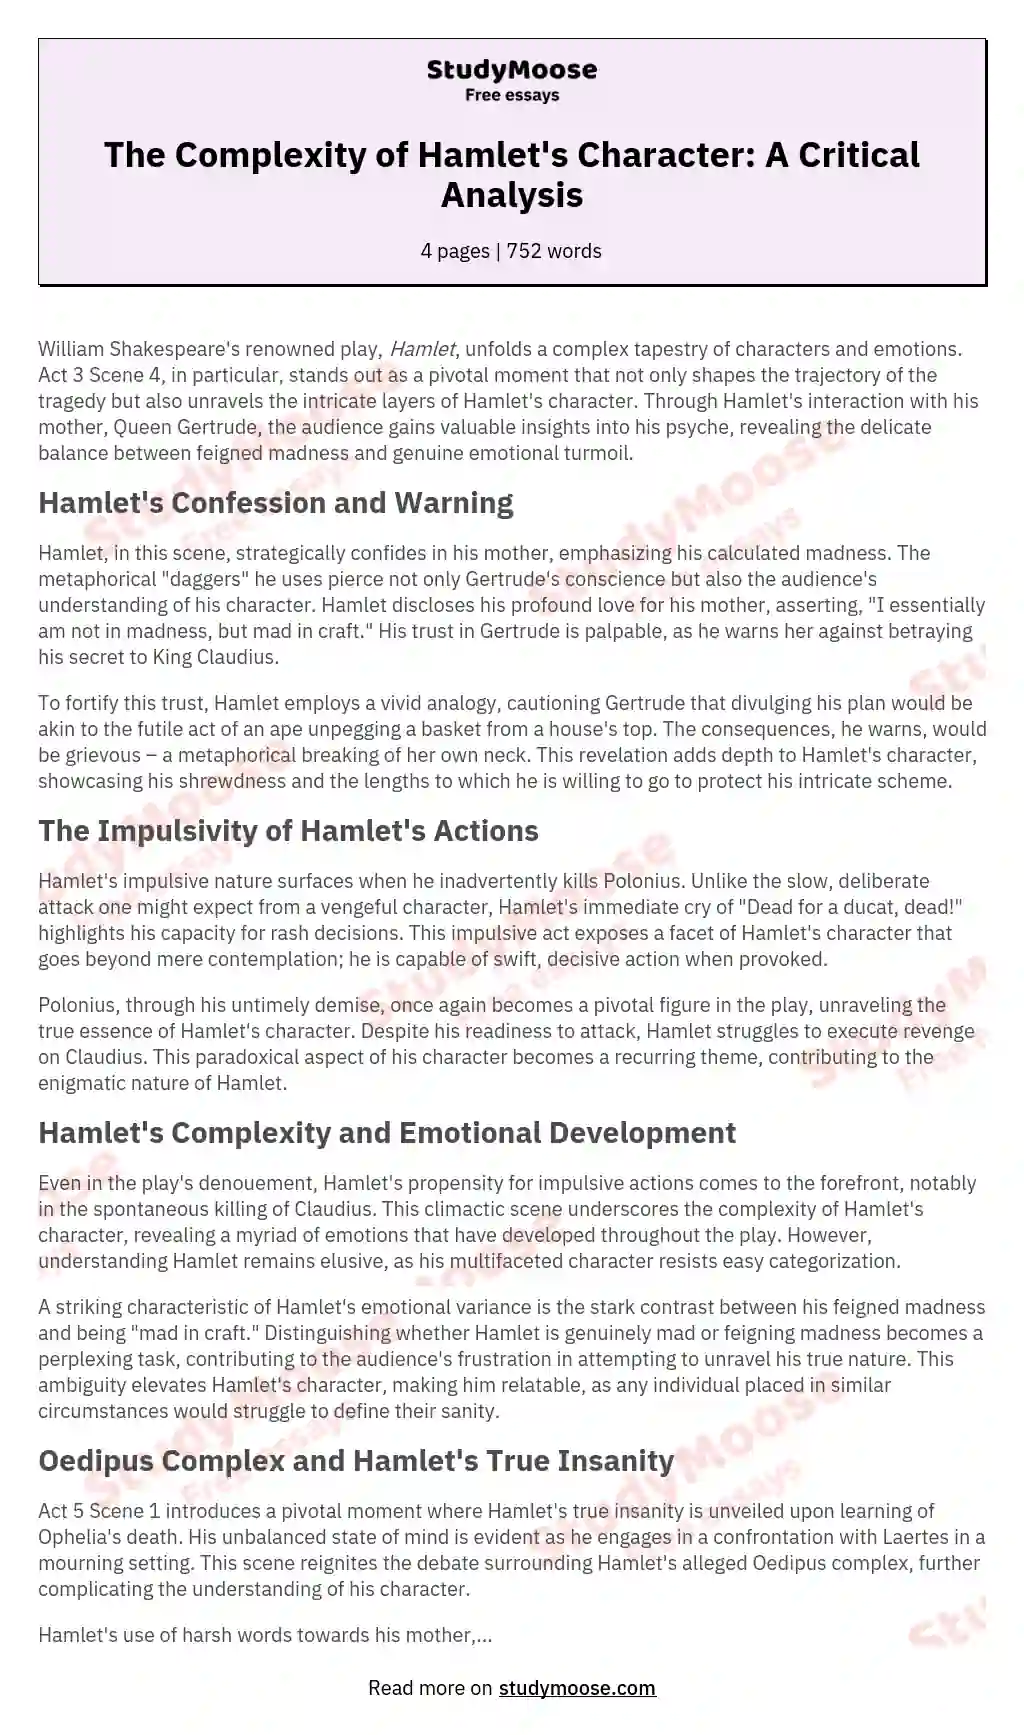 The Complexity of Hamlet's Character: A Critical Analysis essay